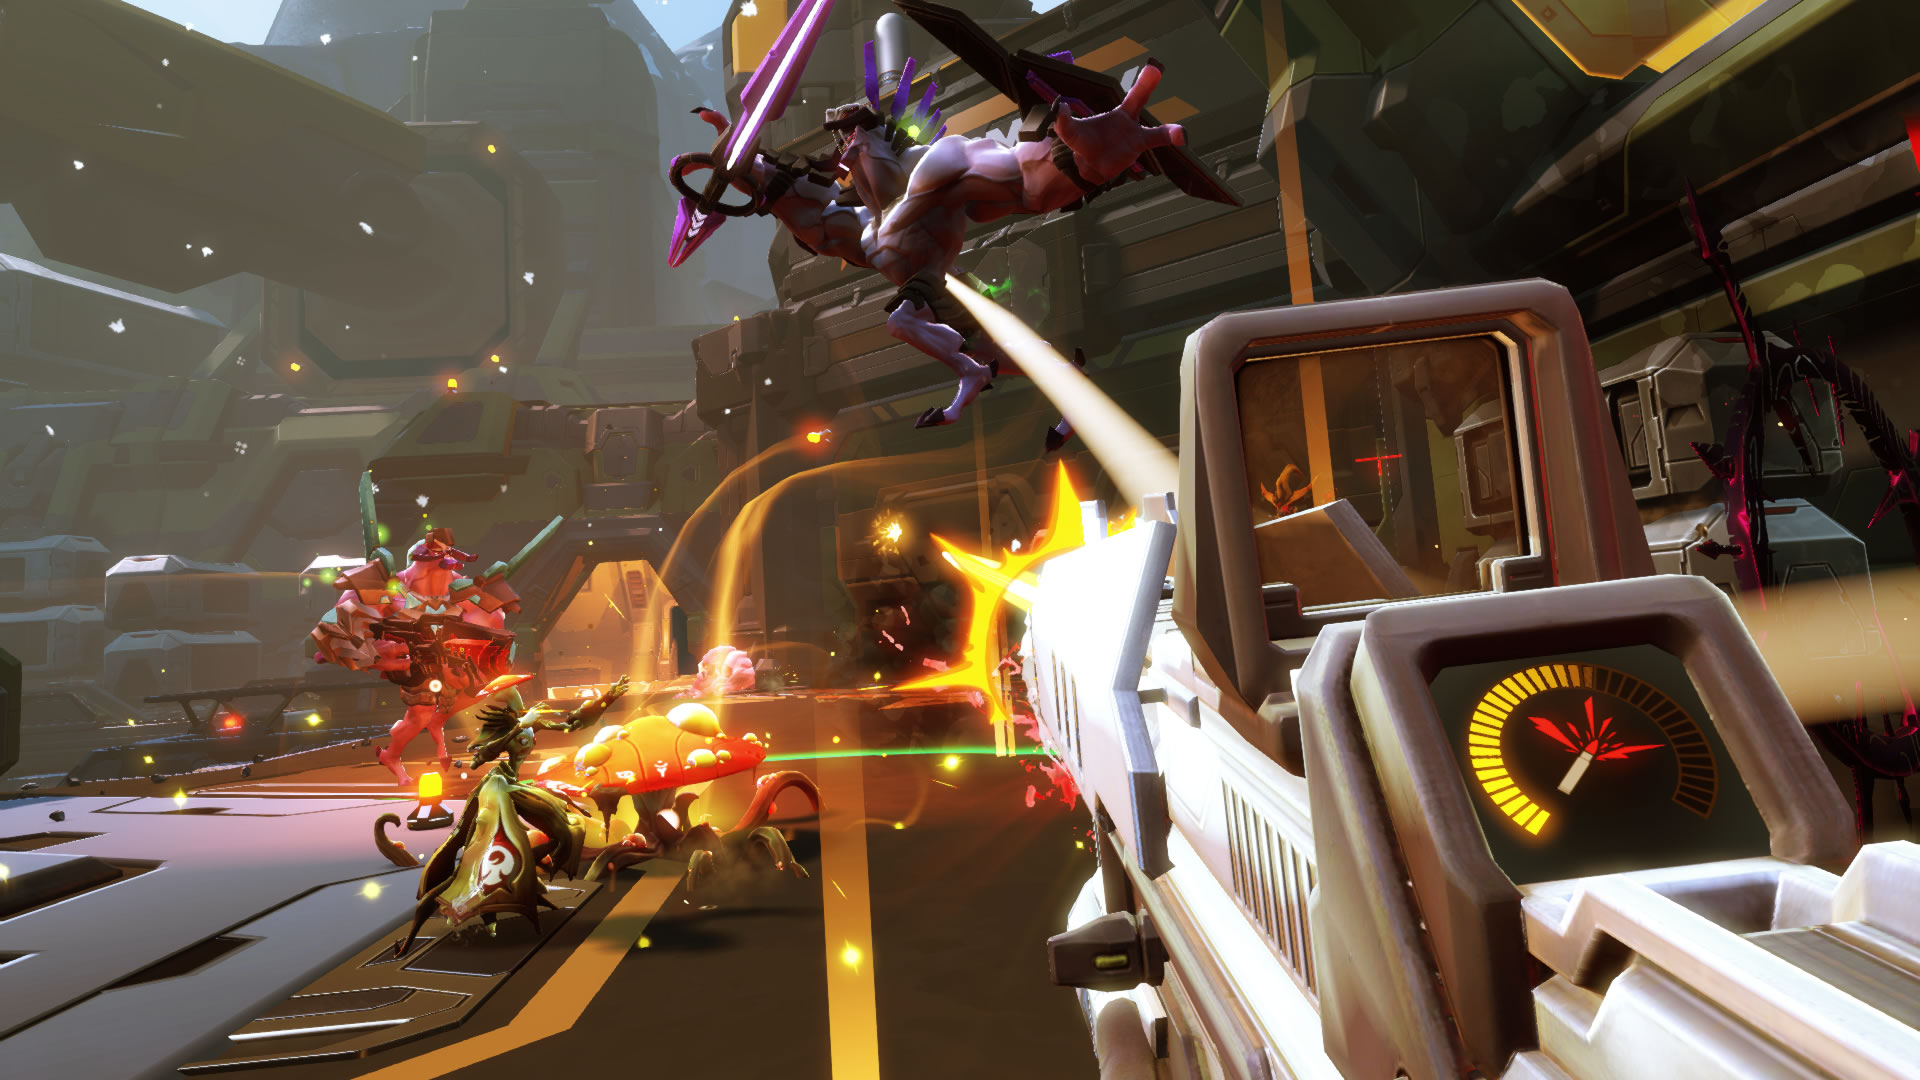 Media asset in full size related to 3dfxzone.it news item entitled as follows: Gearbox e 2K Games annunciano la closed beta dello shooter Battleborn | Image Name: news23229_Battleborn-Screenshot_4.jpg